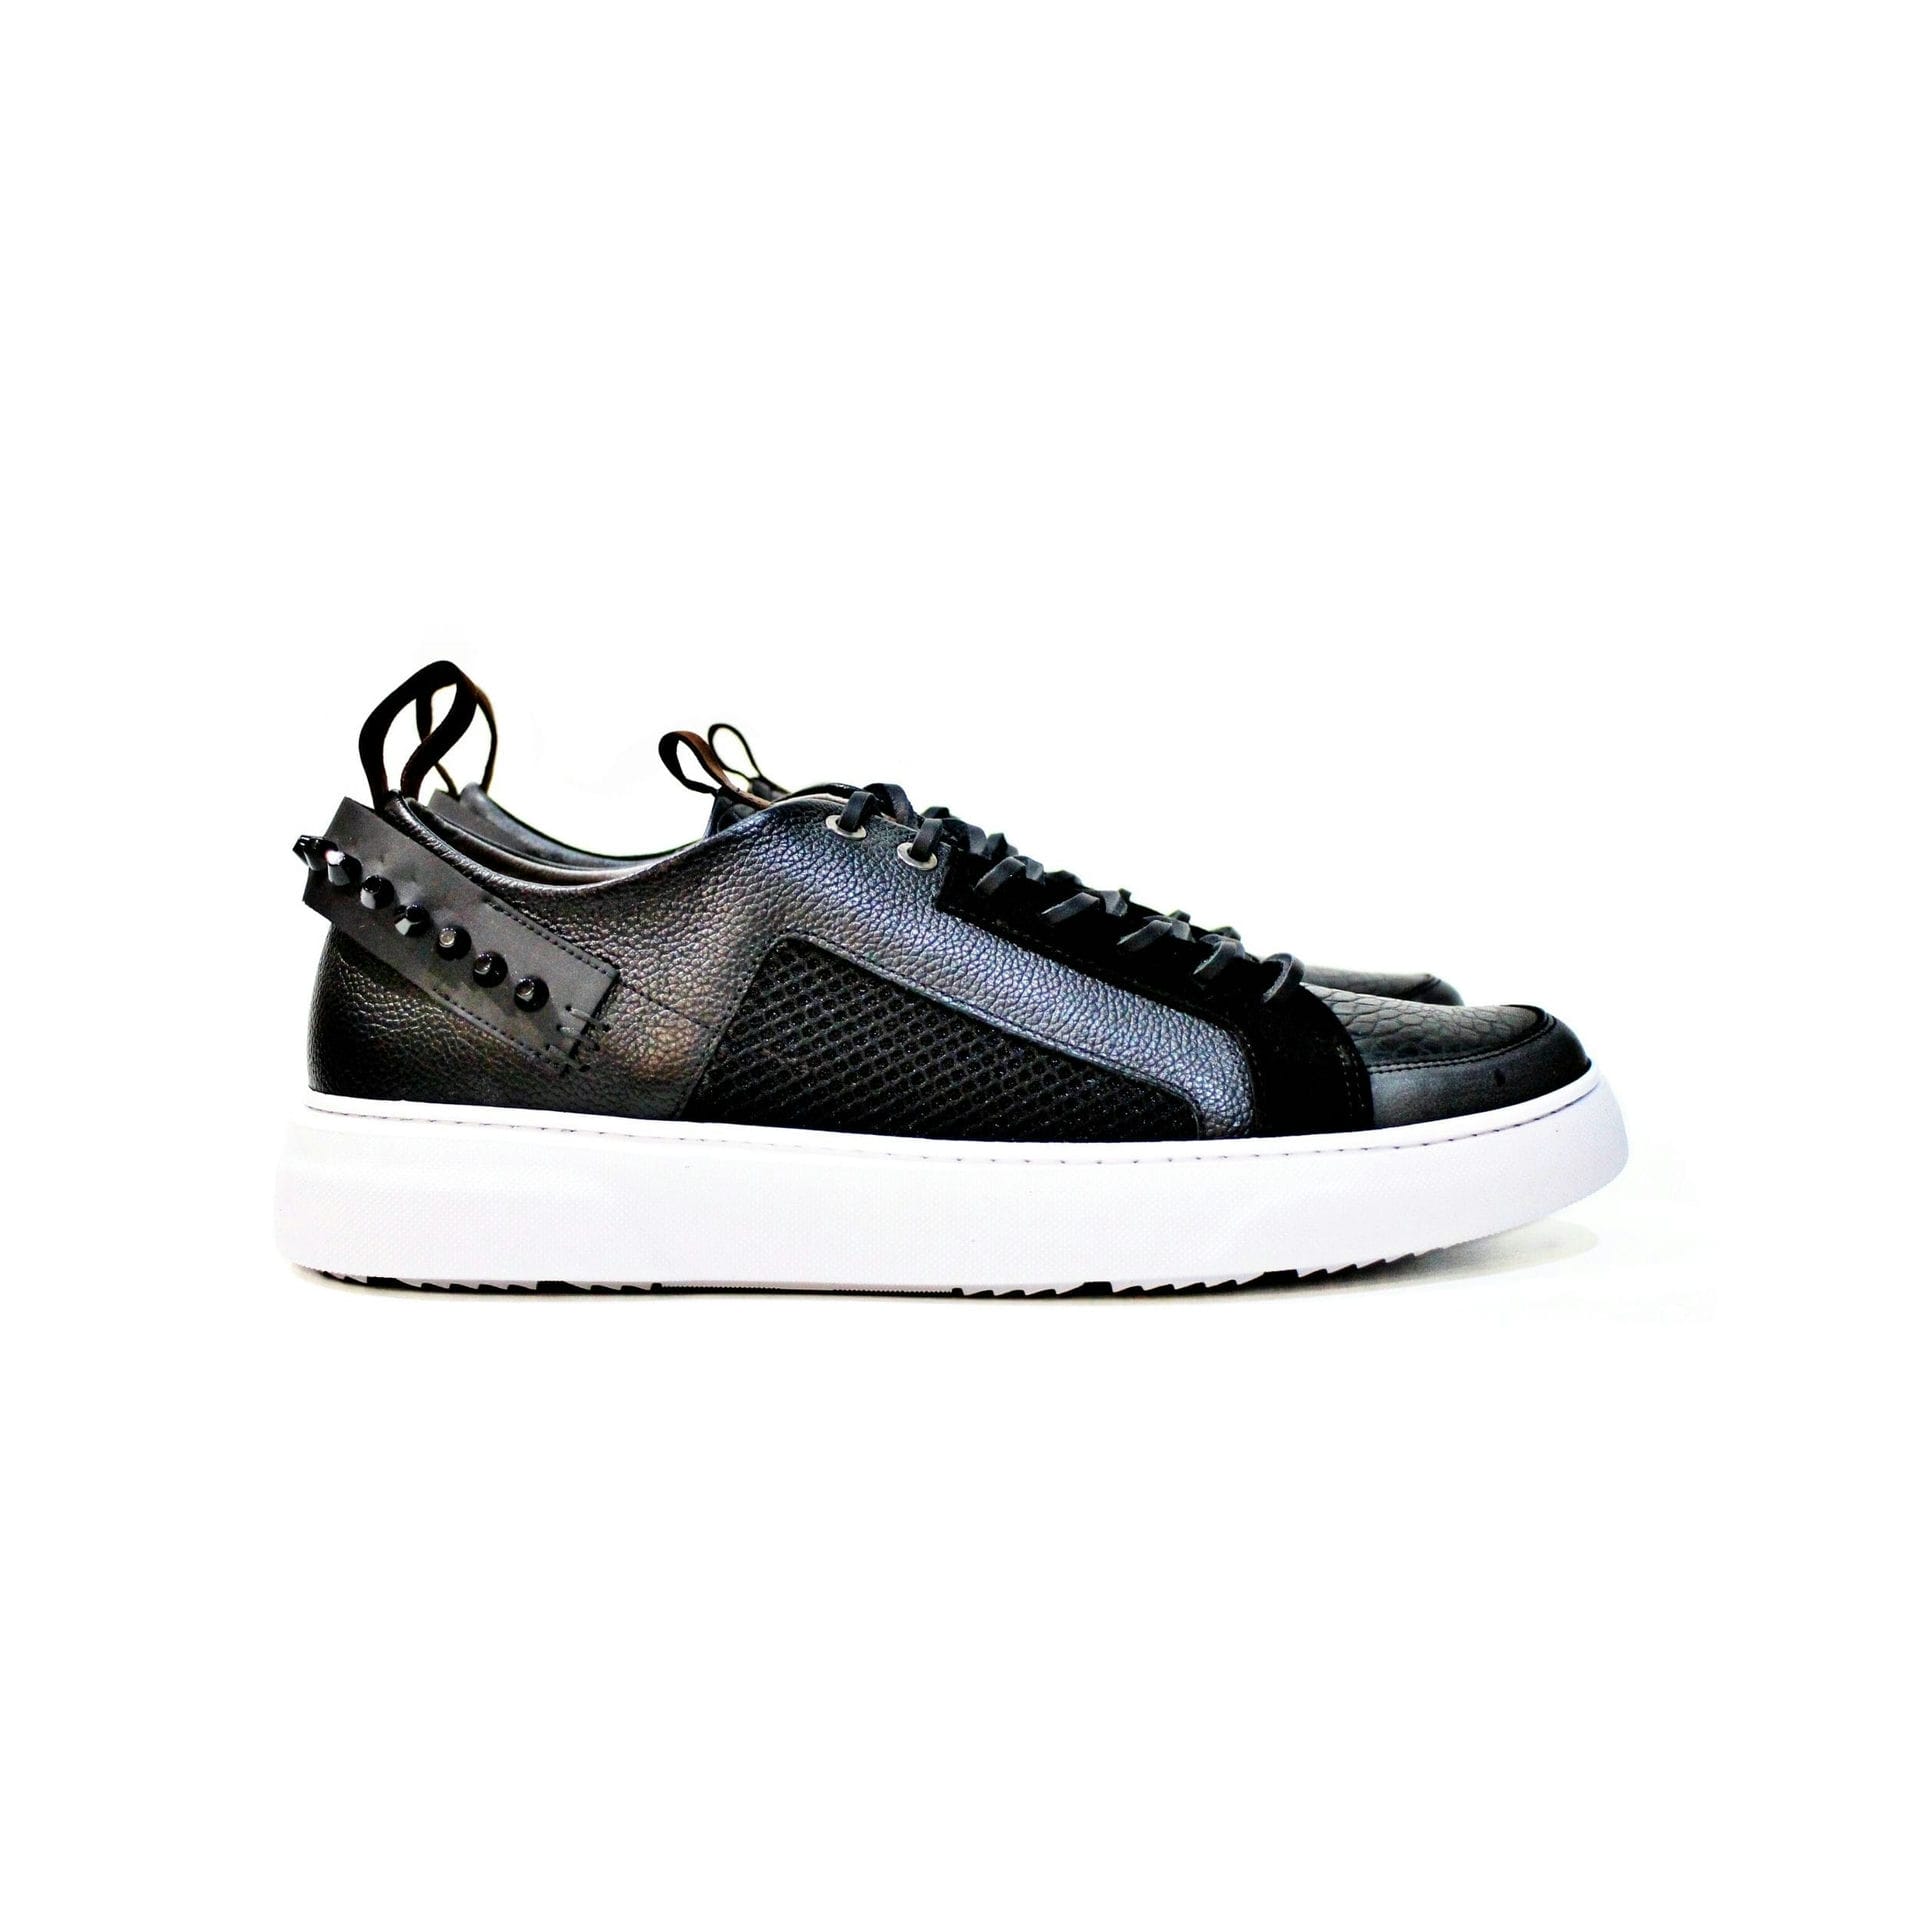 Leather sneaker, suede, fabric, rubber, with EVA sole. Handmade in Portugal. “Walk with Pintta”